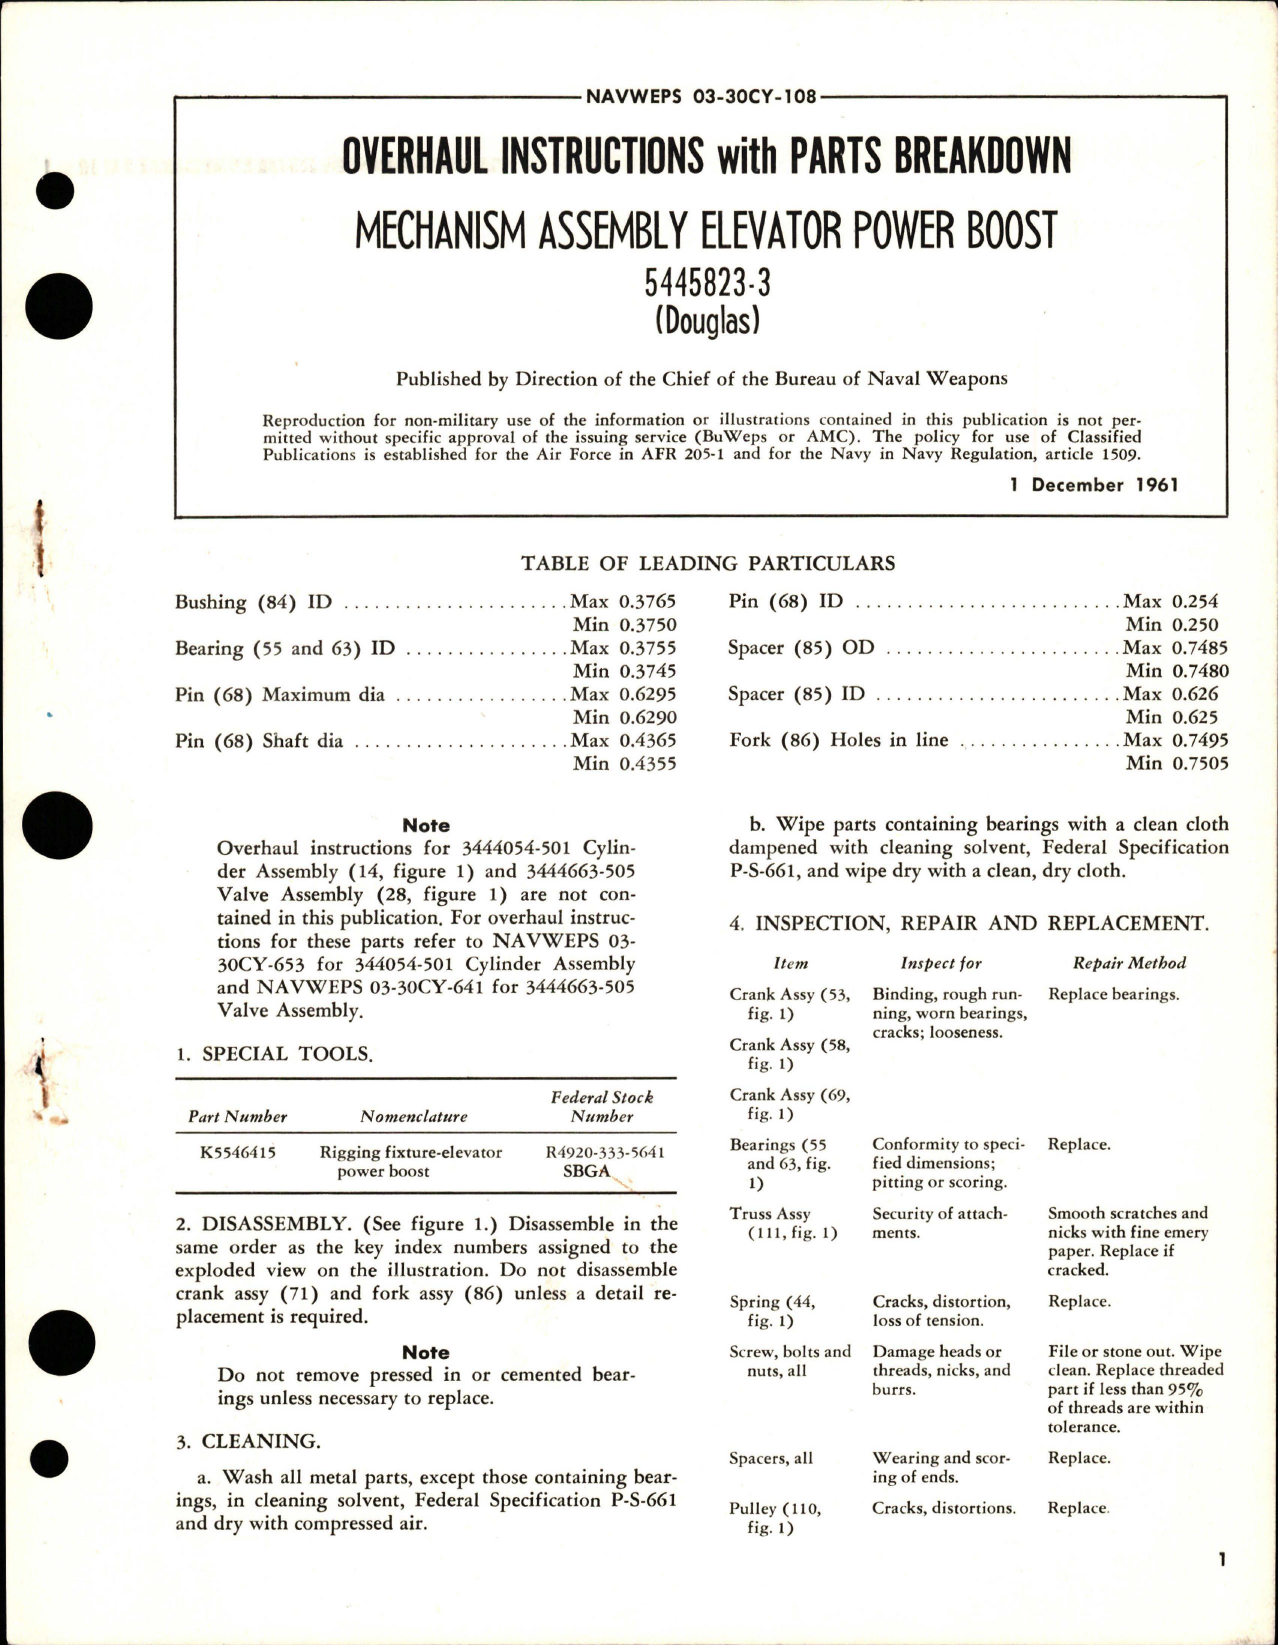 Sample page 1 from AirCorps Library document: Overhaul Instructions with Parts for Mechanism Assembly Elevator Power Boost - 5445823-3